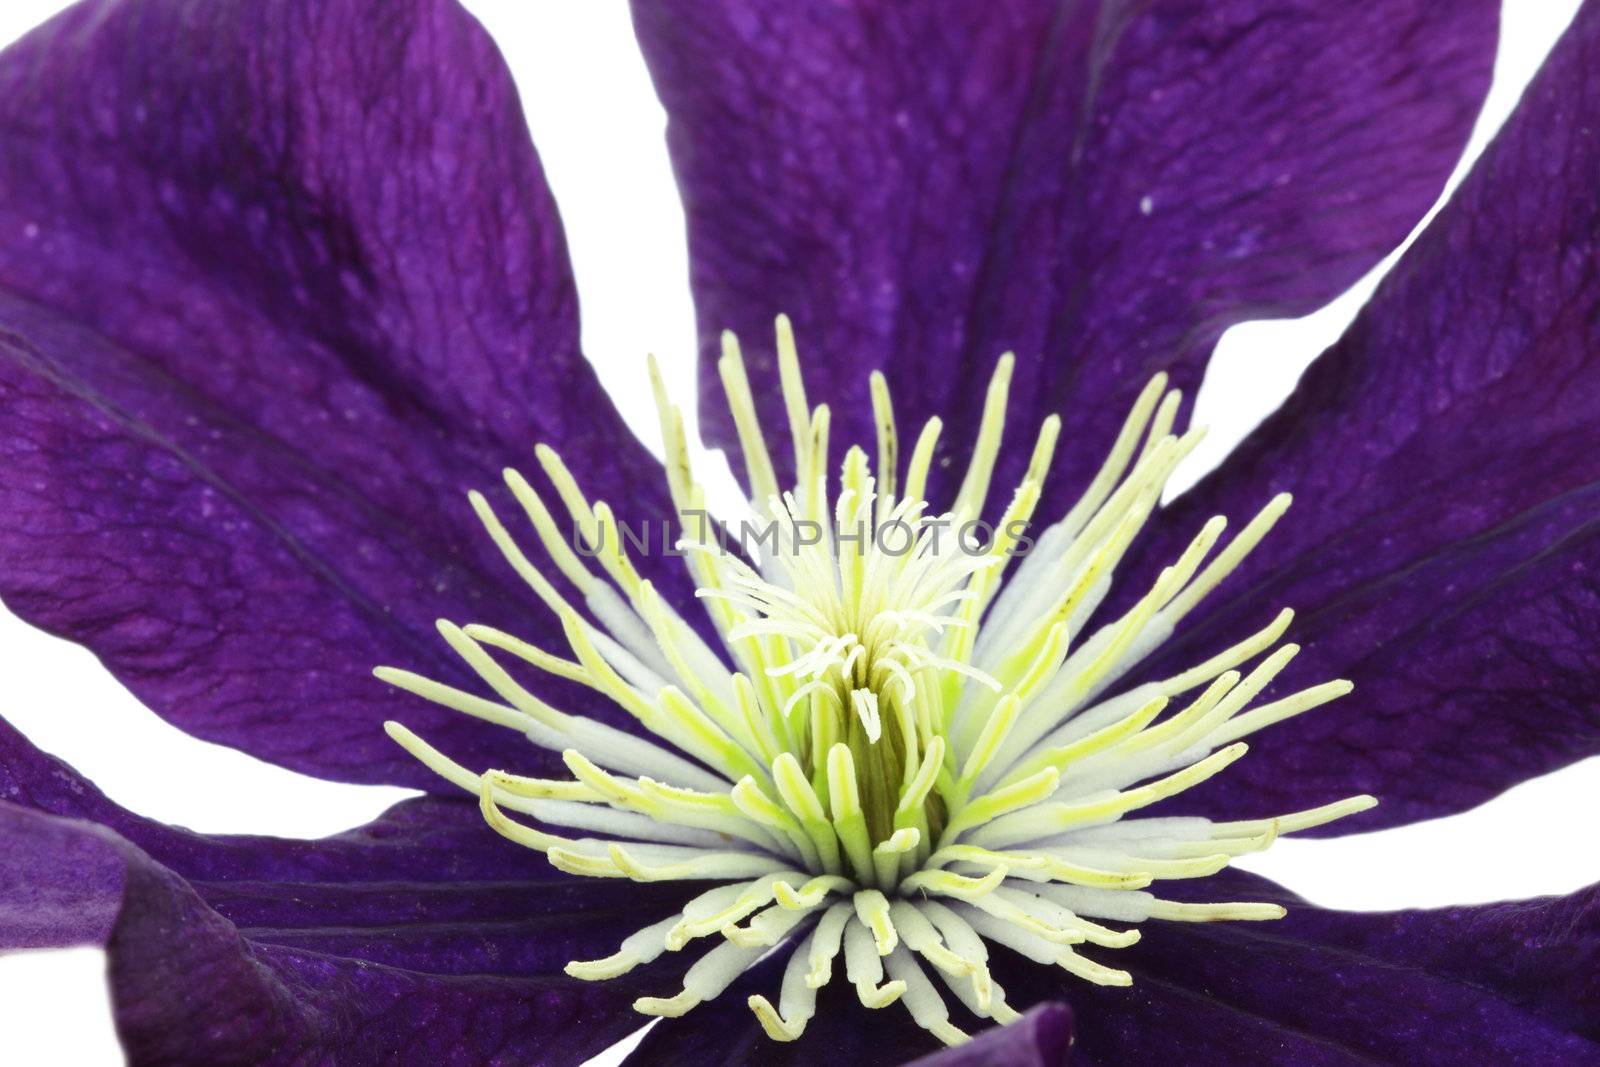 Macro of Clematis stamen and pistil against a white background.  Shallow DOF.